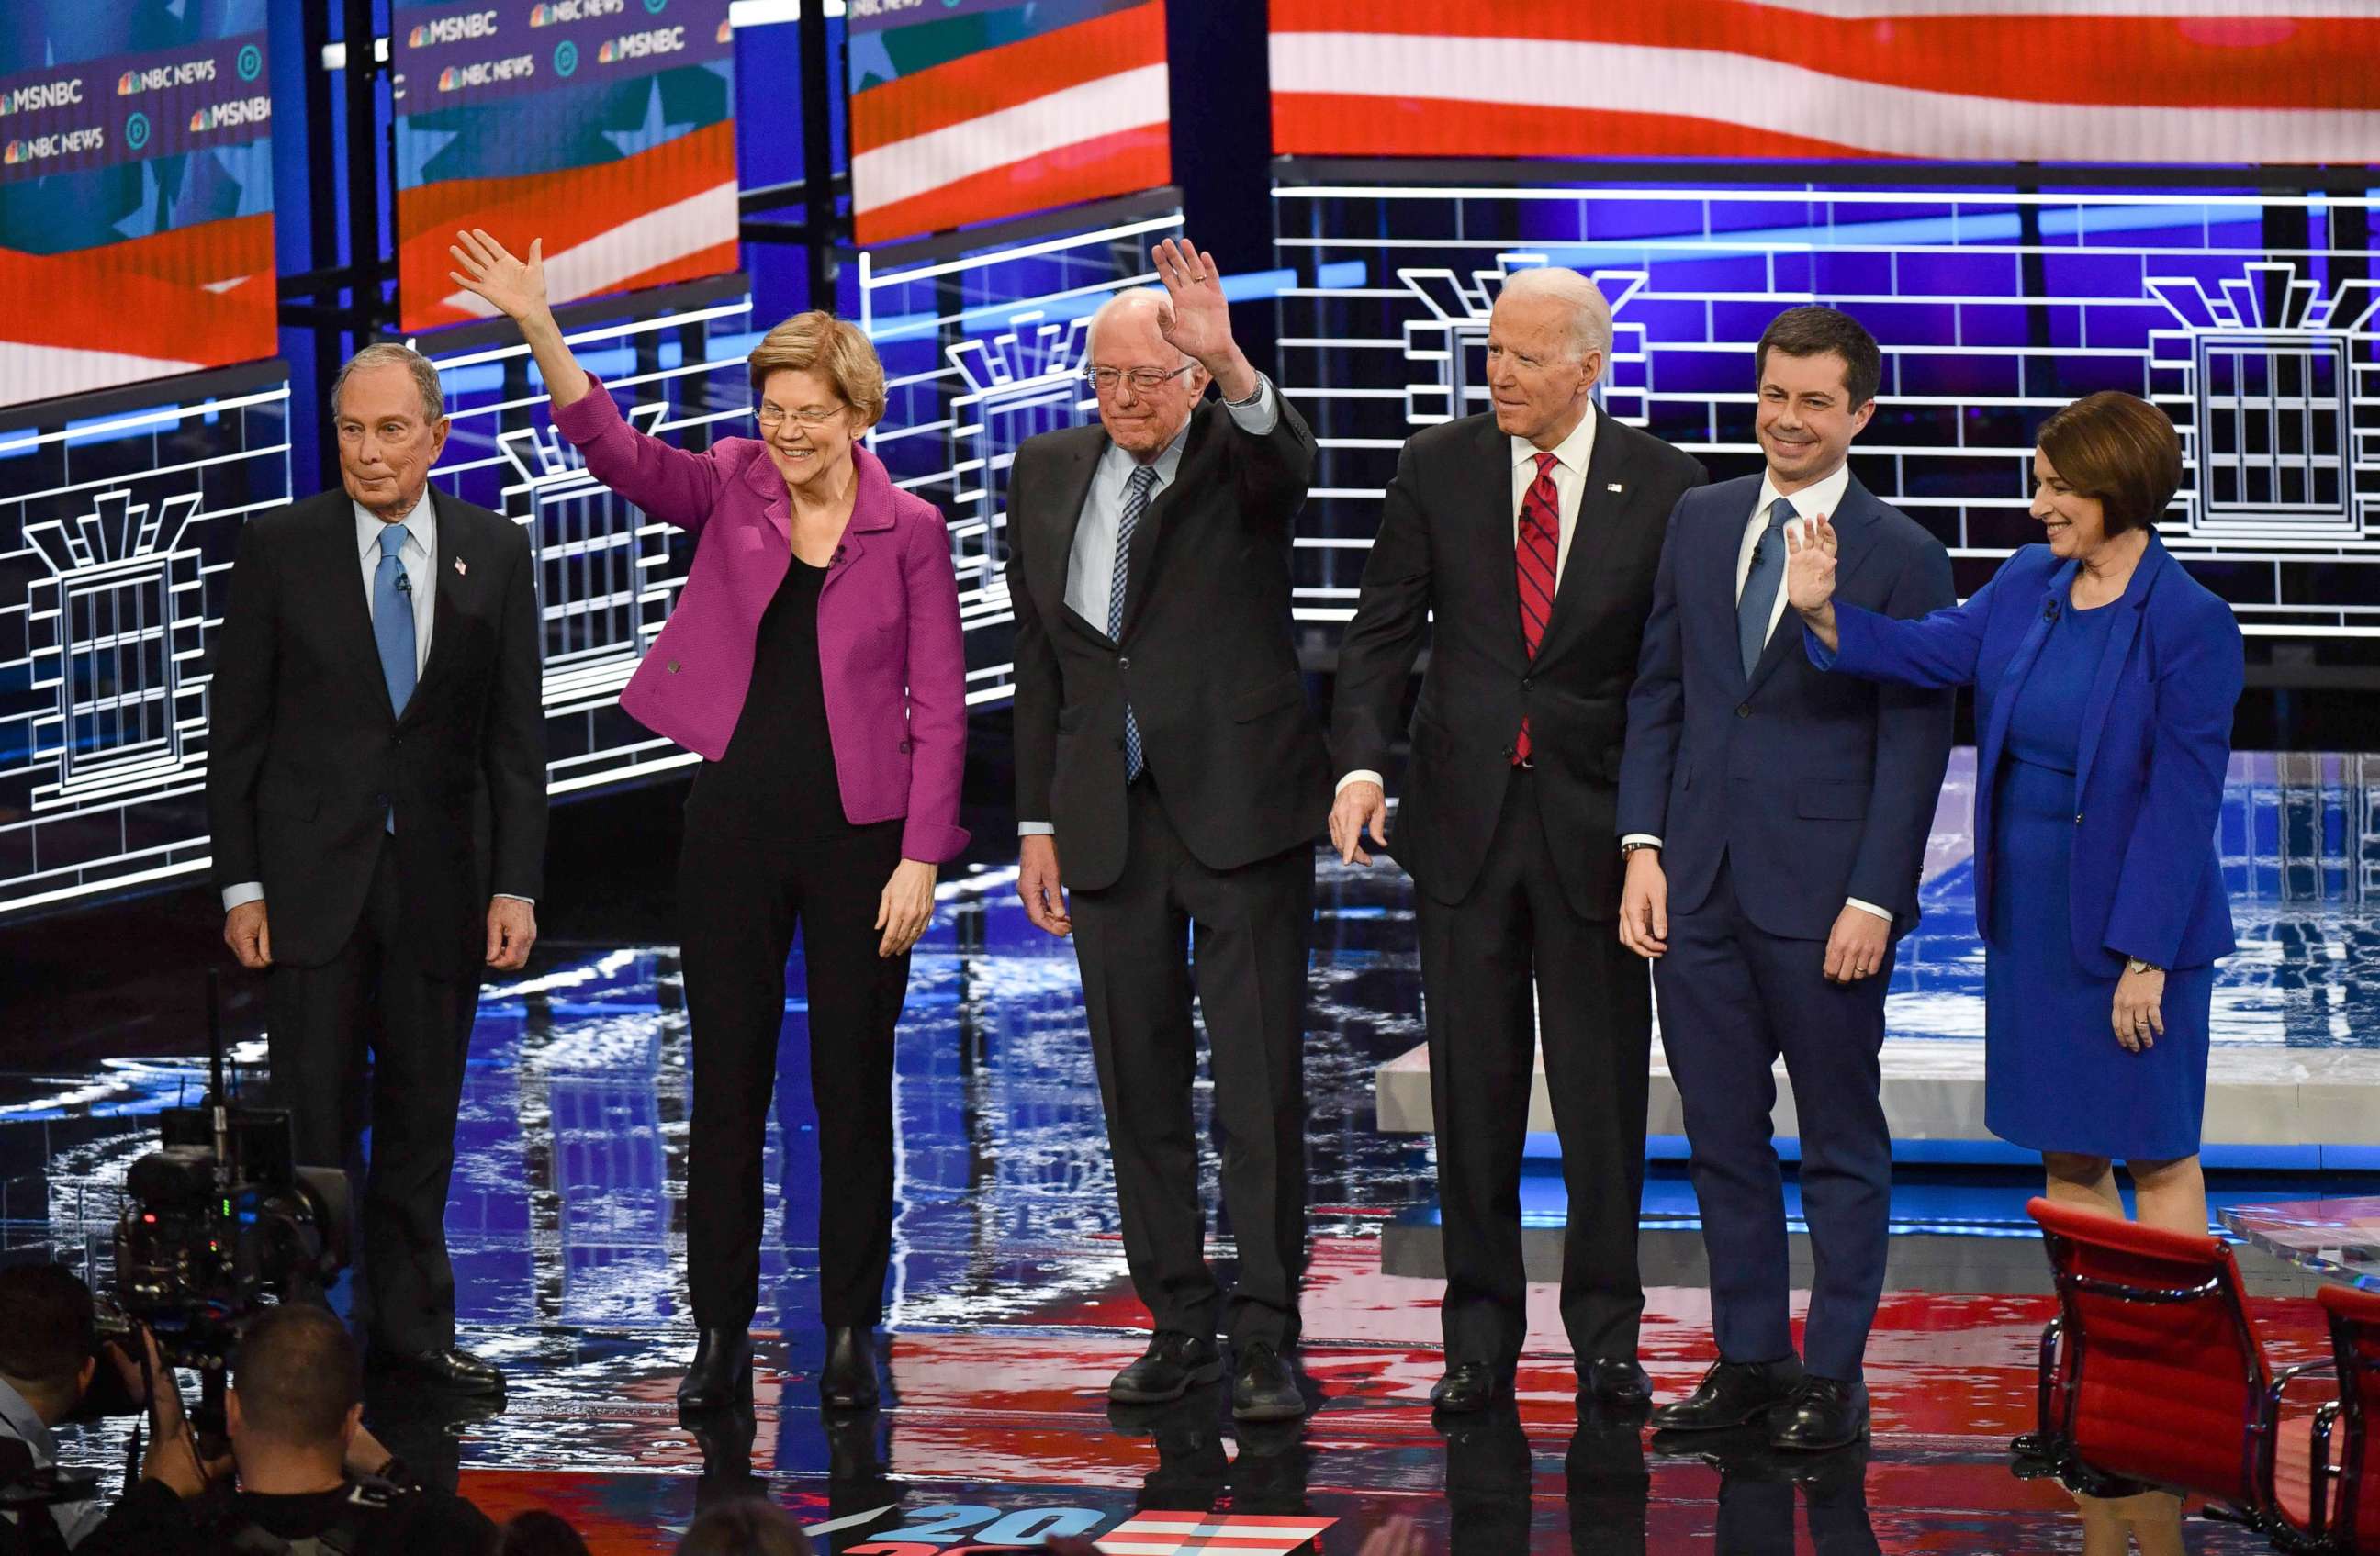 PHOTO: Democratic primary debate of the 2020 presidential campaign season co-hosted by NBC News, MSNBC, Noticias Telemundo and The Nevada Independent at the Paris Theater in Las Vegas, Feb. 19, 2020.